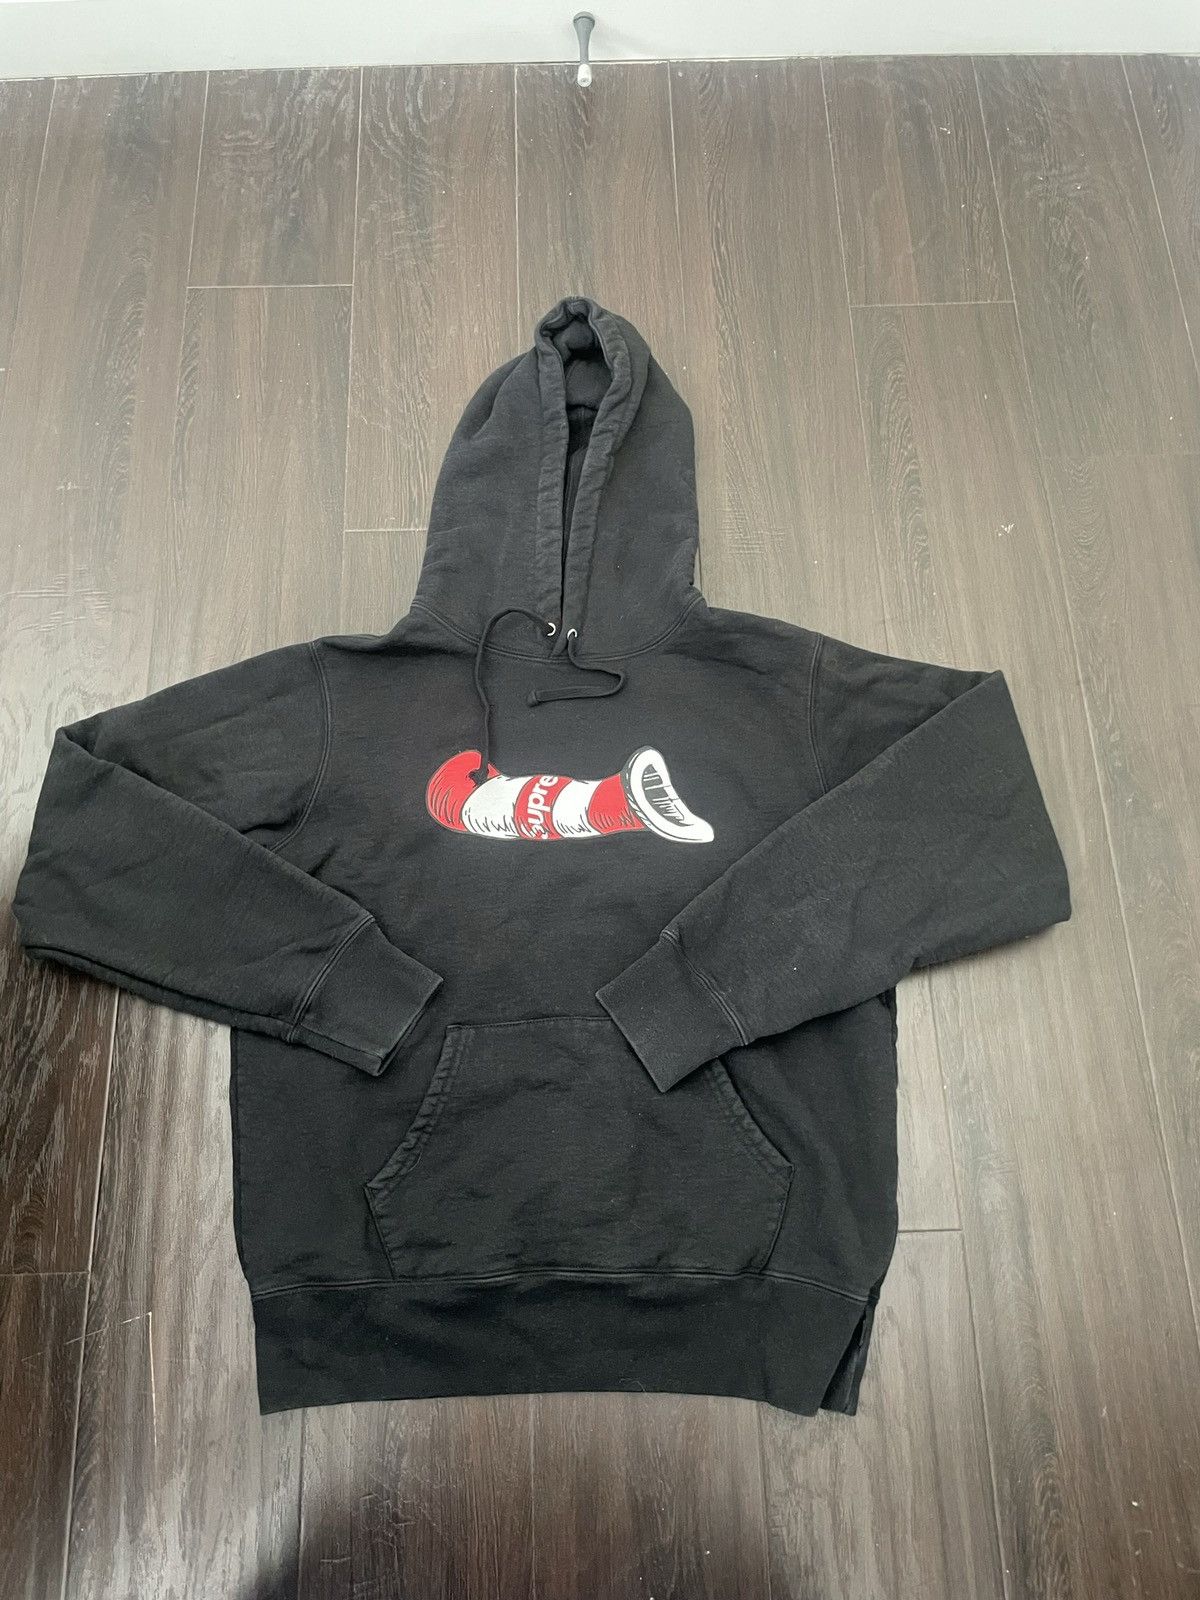 Supreme Supreme Cat in the Hat Hoodie | Grailed